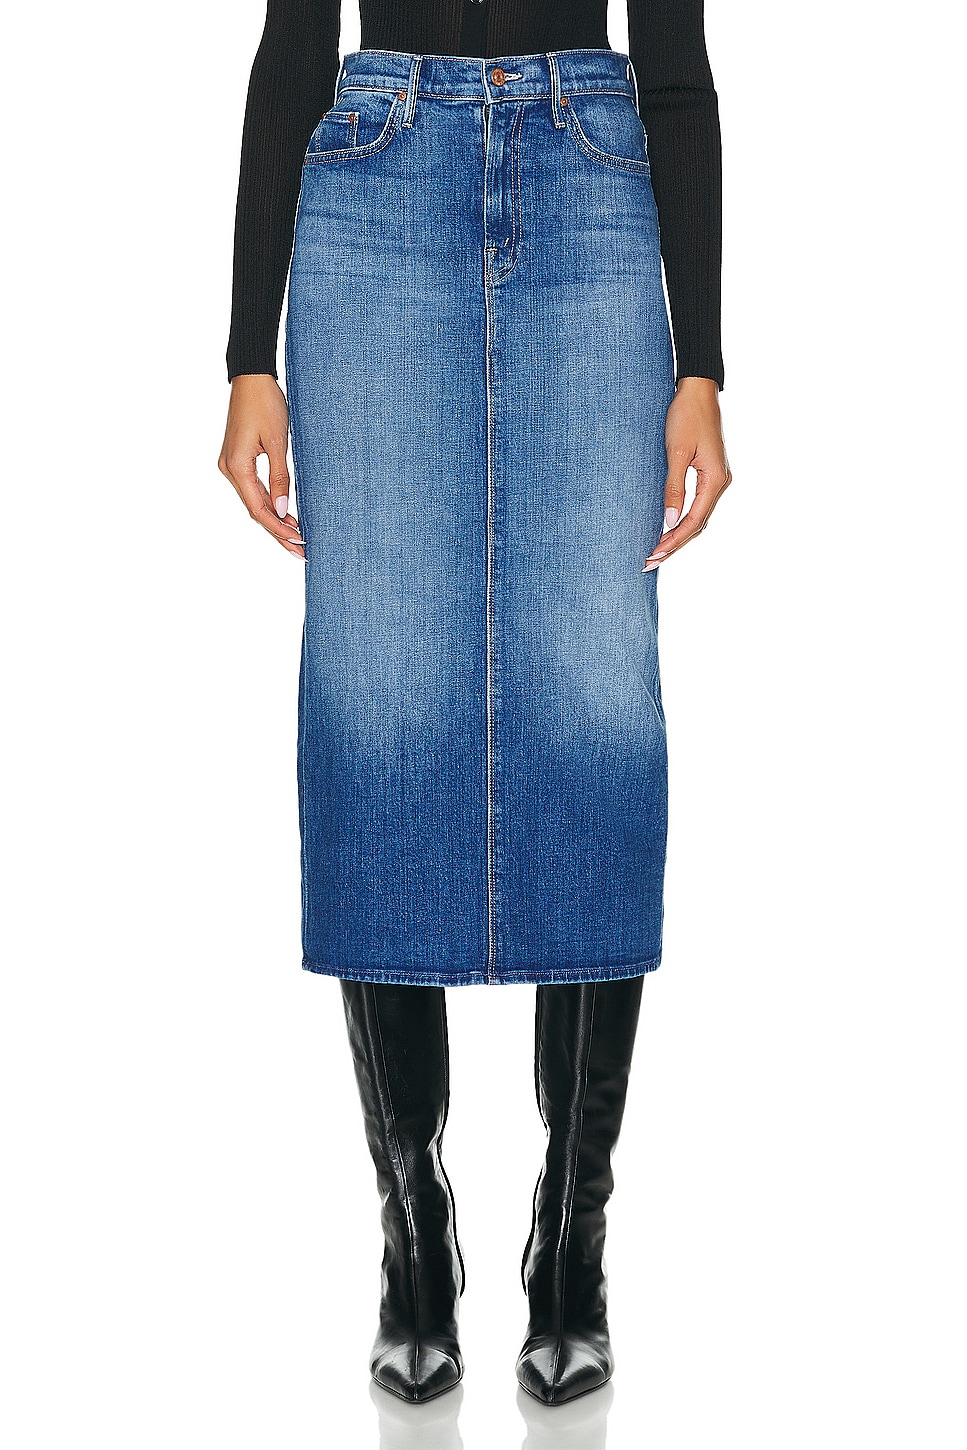 Image 1 of MOTHER The Pencil Pusher Skirt in New Sheriff In Town